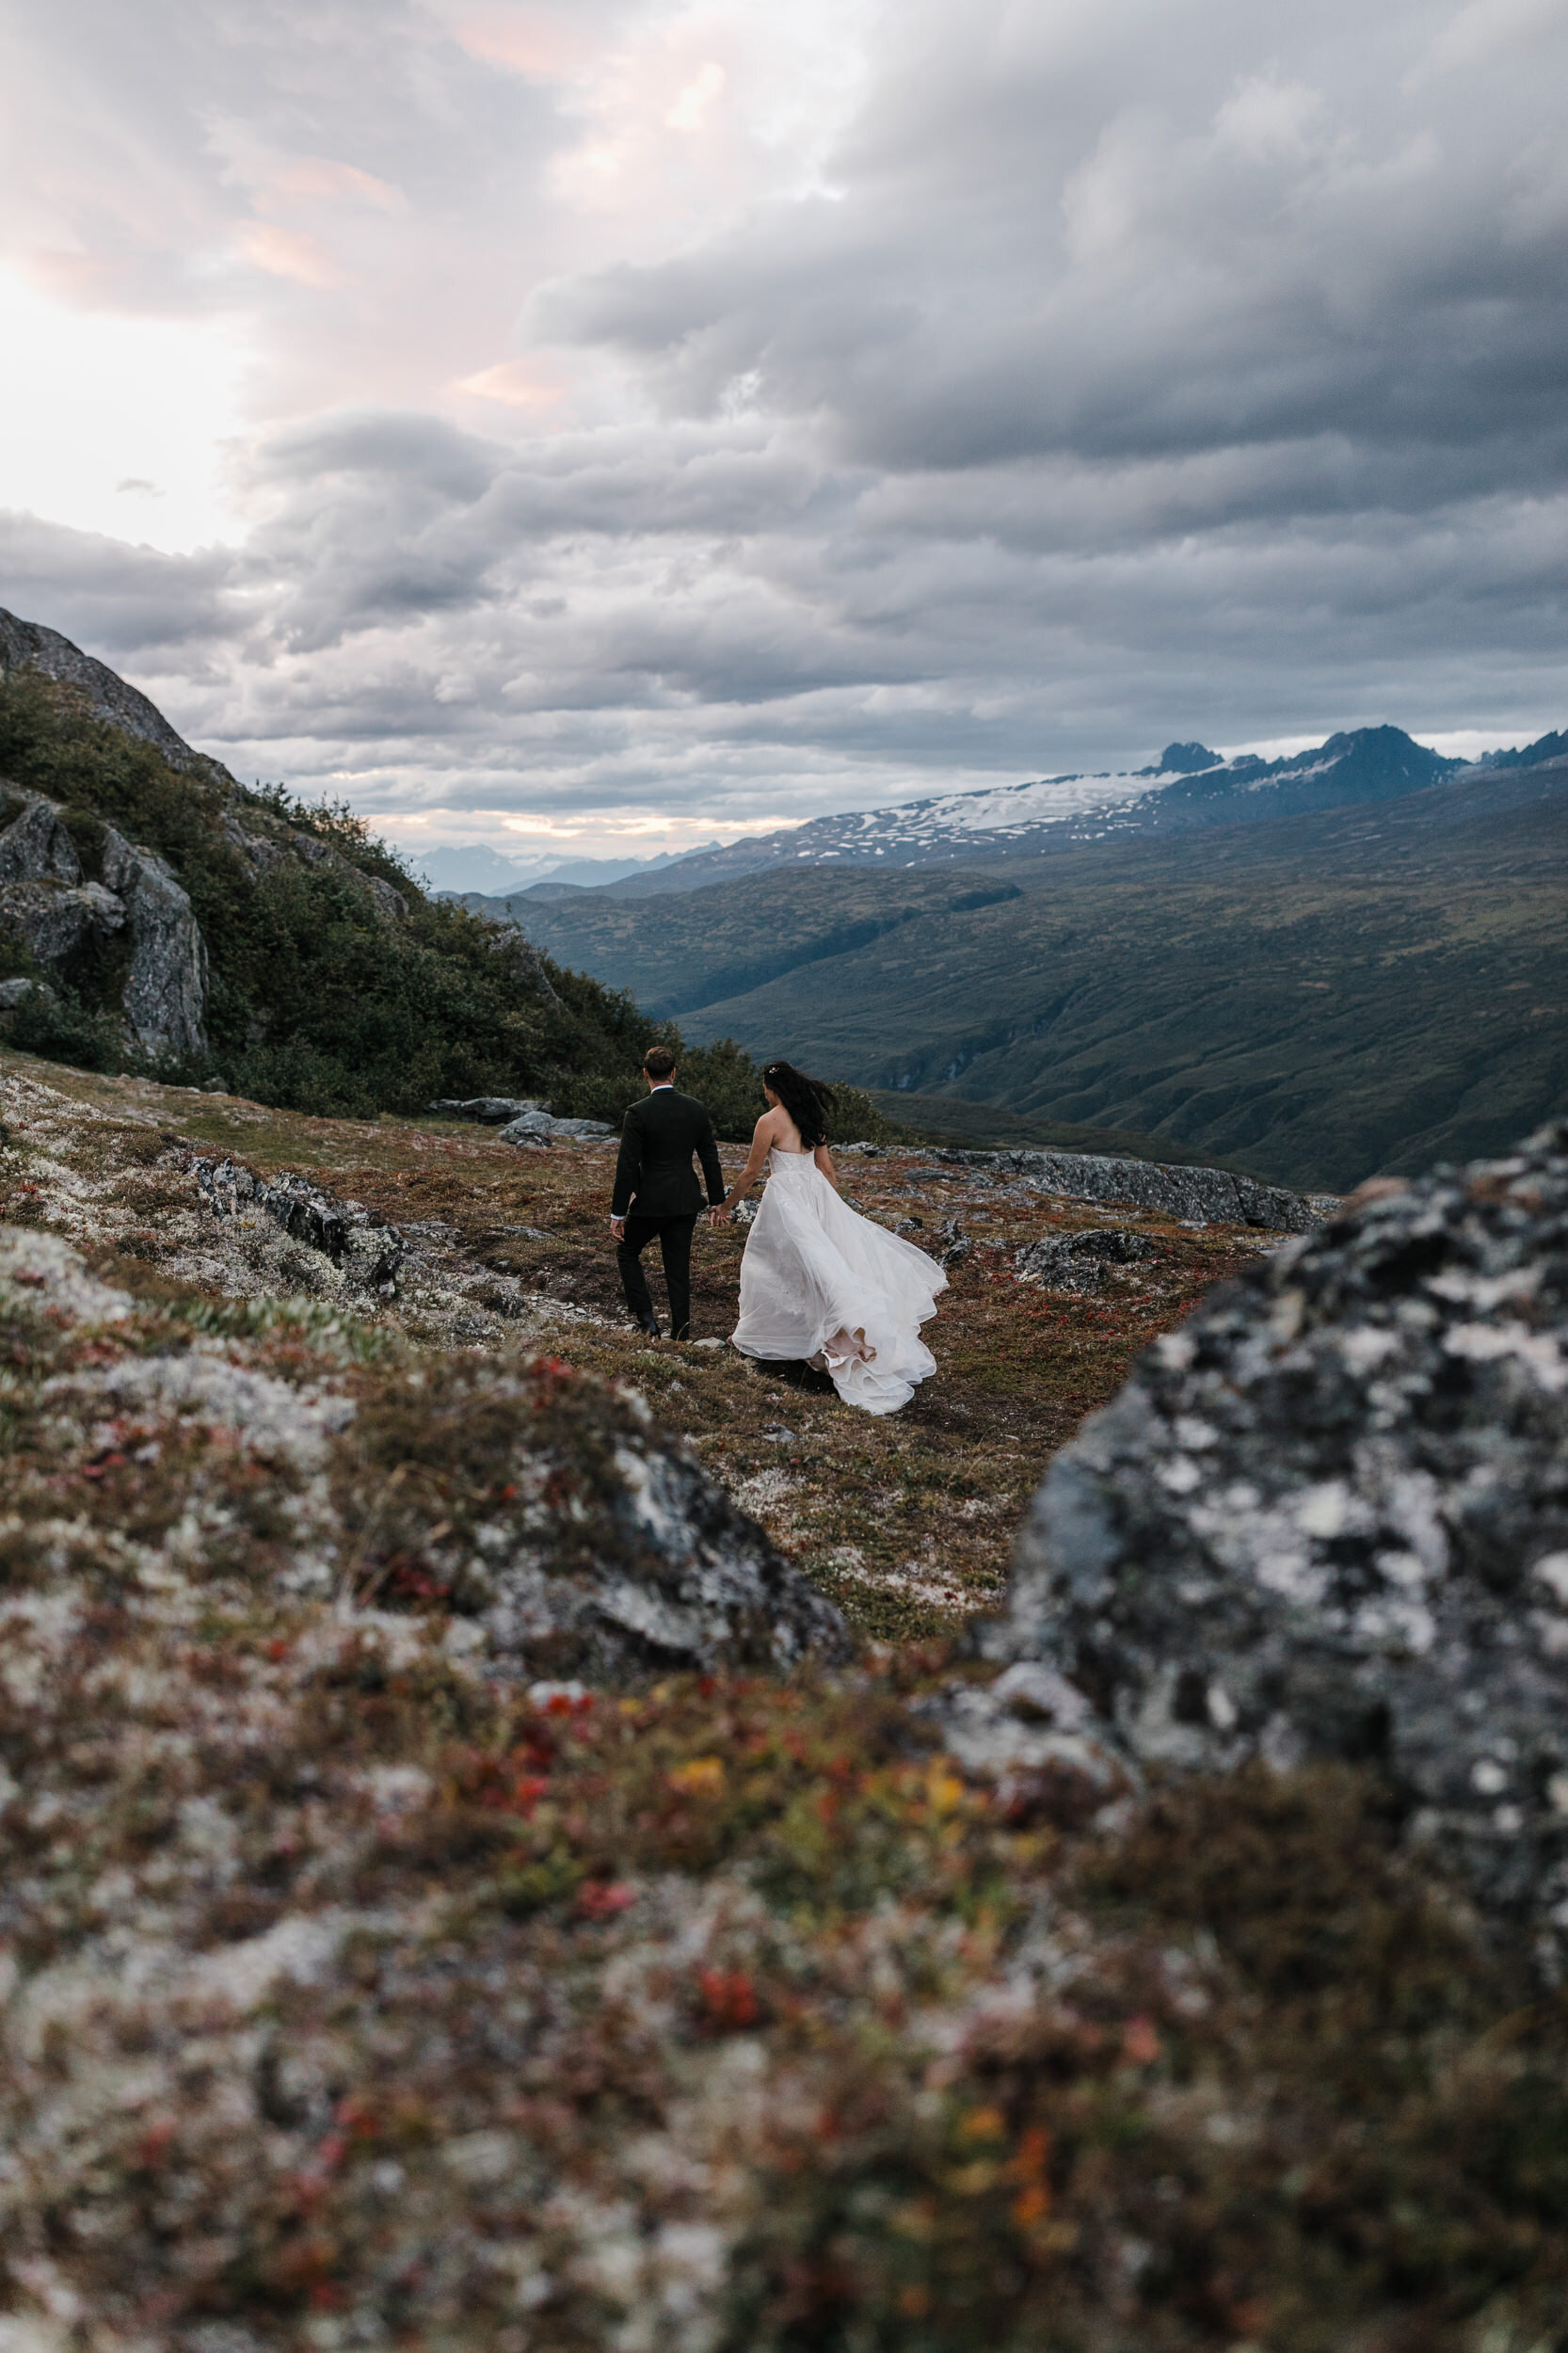 Alaska Elopement on top of a Mountain | Best of 2020, Our Favorite Wedding Photos of the Year | The Hearnes Adventure Wedding Photography